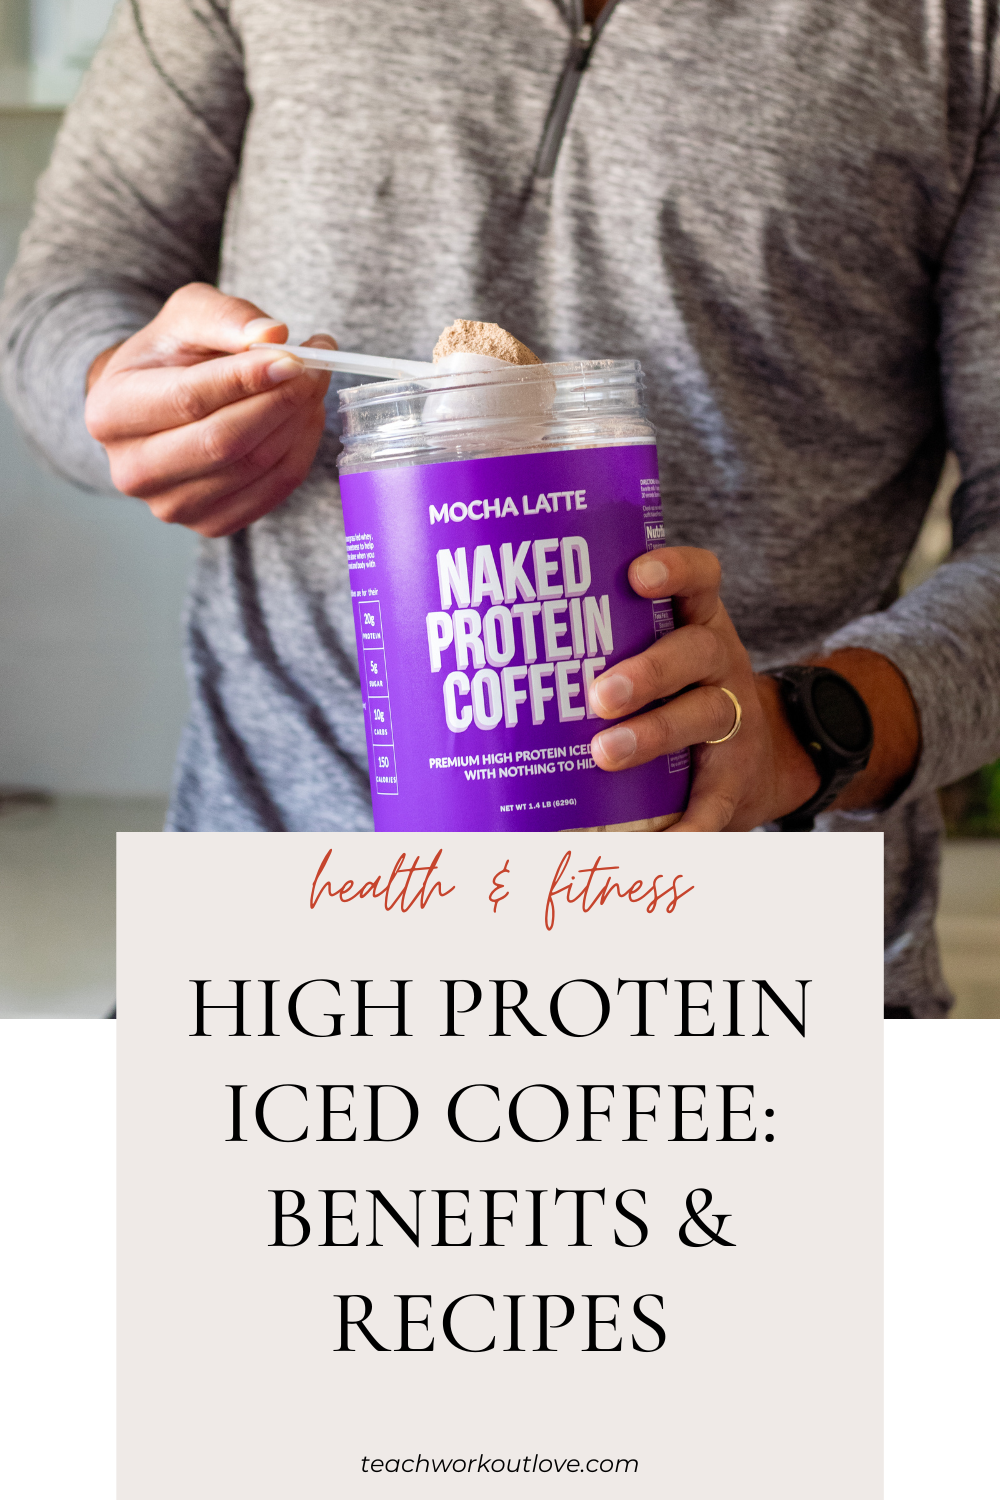 Naked Nutrition delivers with its Mocha Latte Protein Iced Coffee – a blend available in both delightful mocha and vanilla flavors.